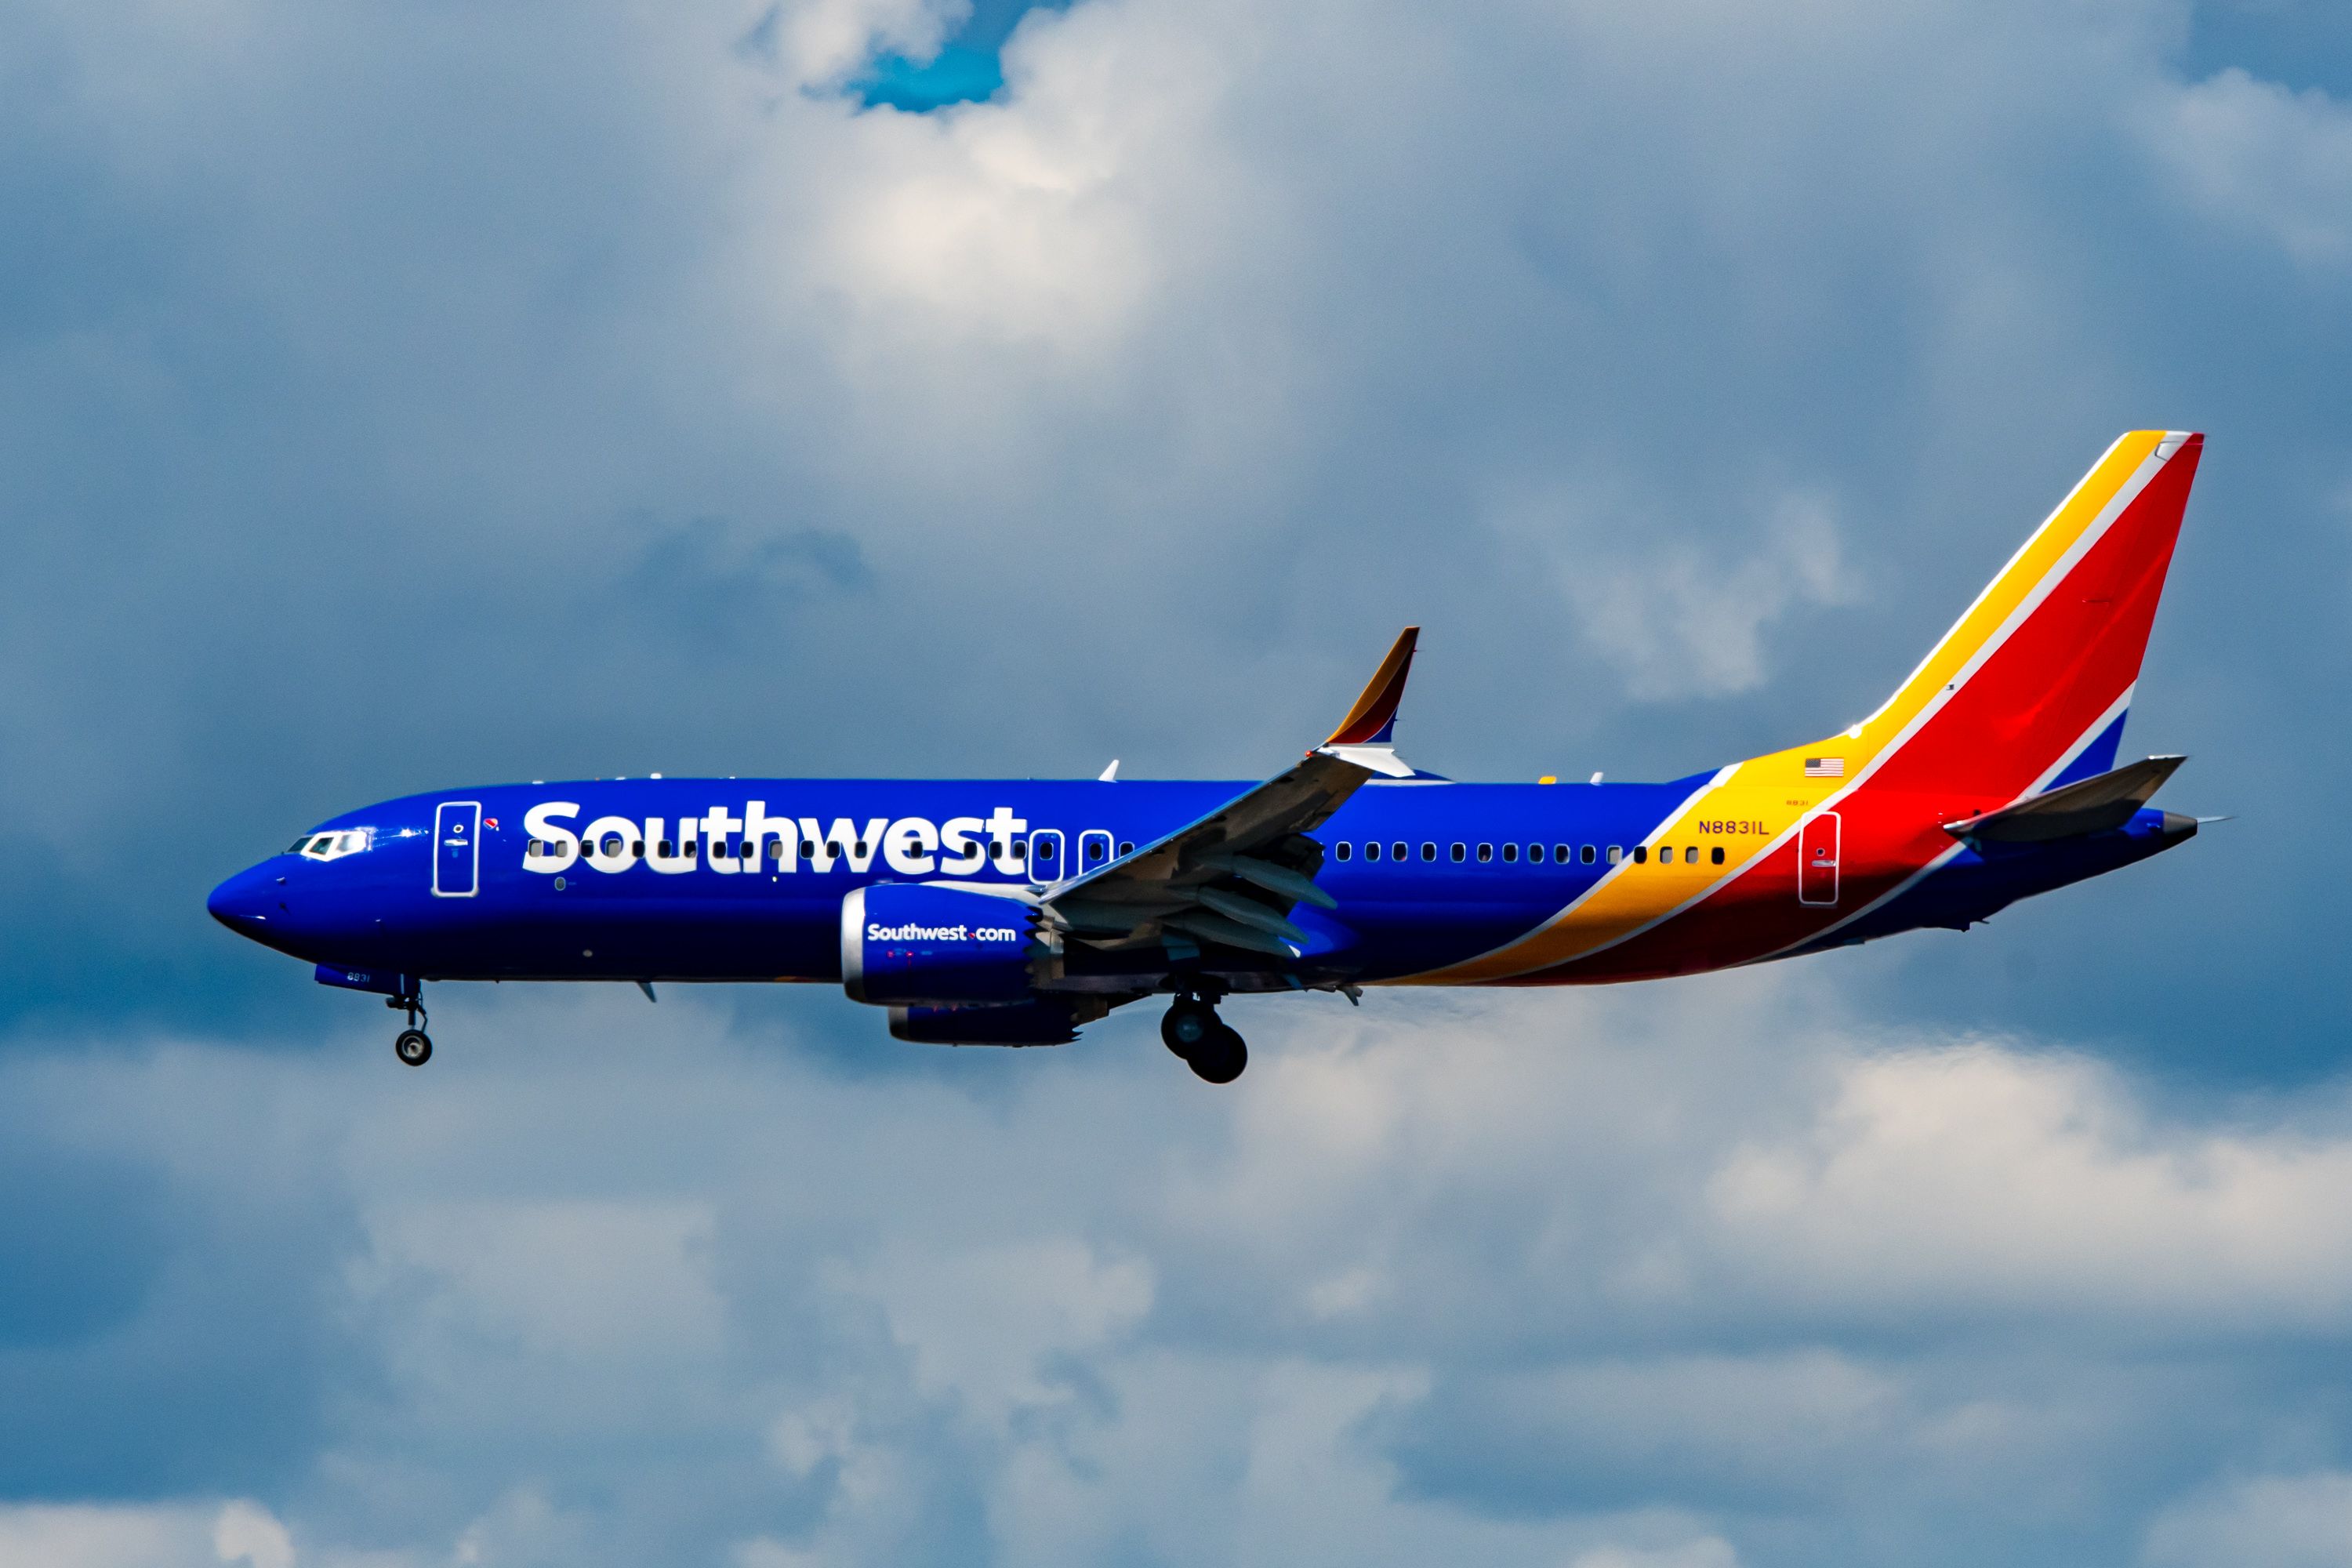 Southwest Airlines Boeing 737 MAX 8 on Final Below SEA Clouds